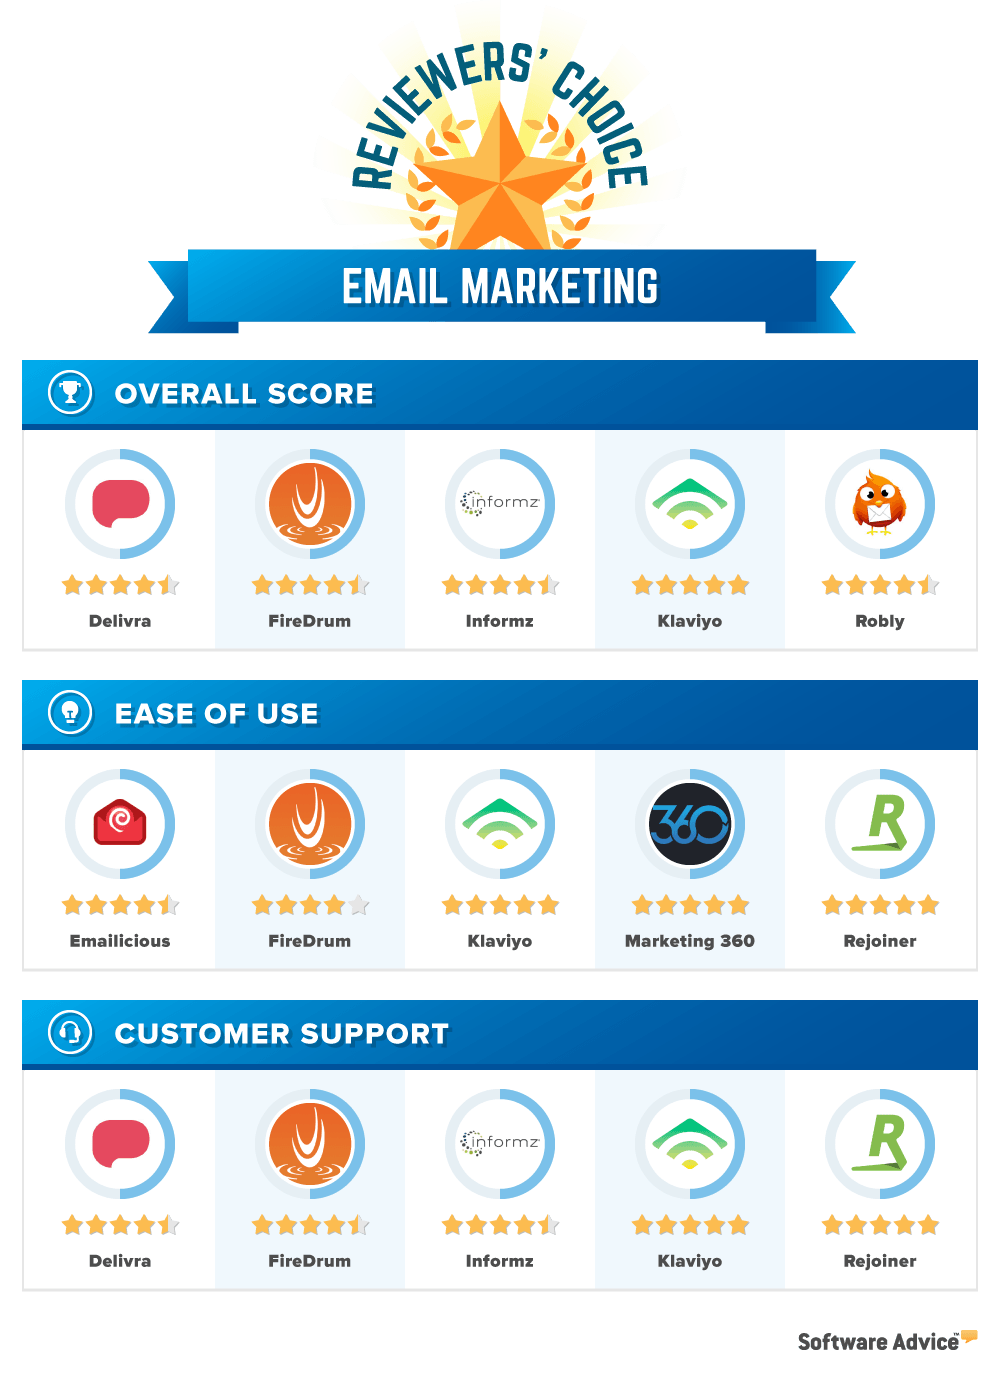 Drip Email Logo - Top Email Marketing Software - 2019 Reviews & Pricing